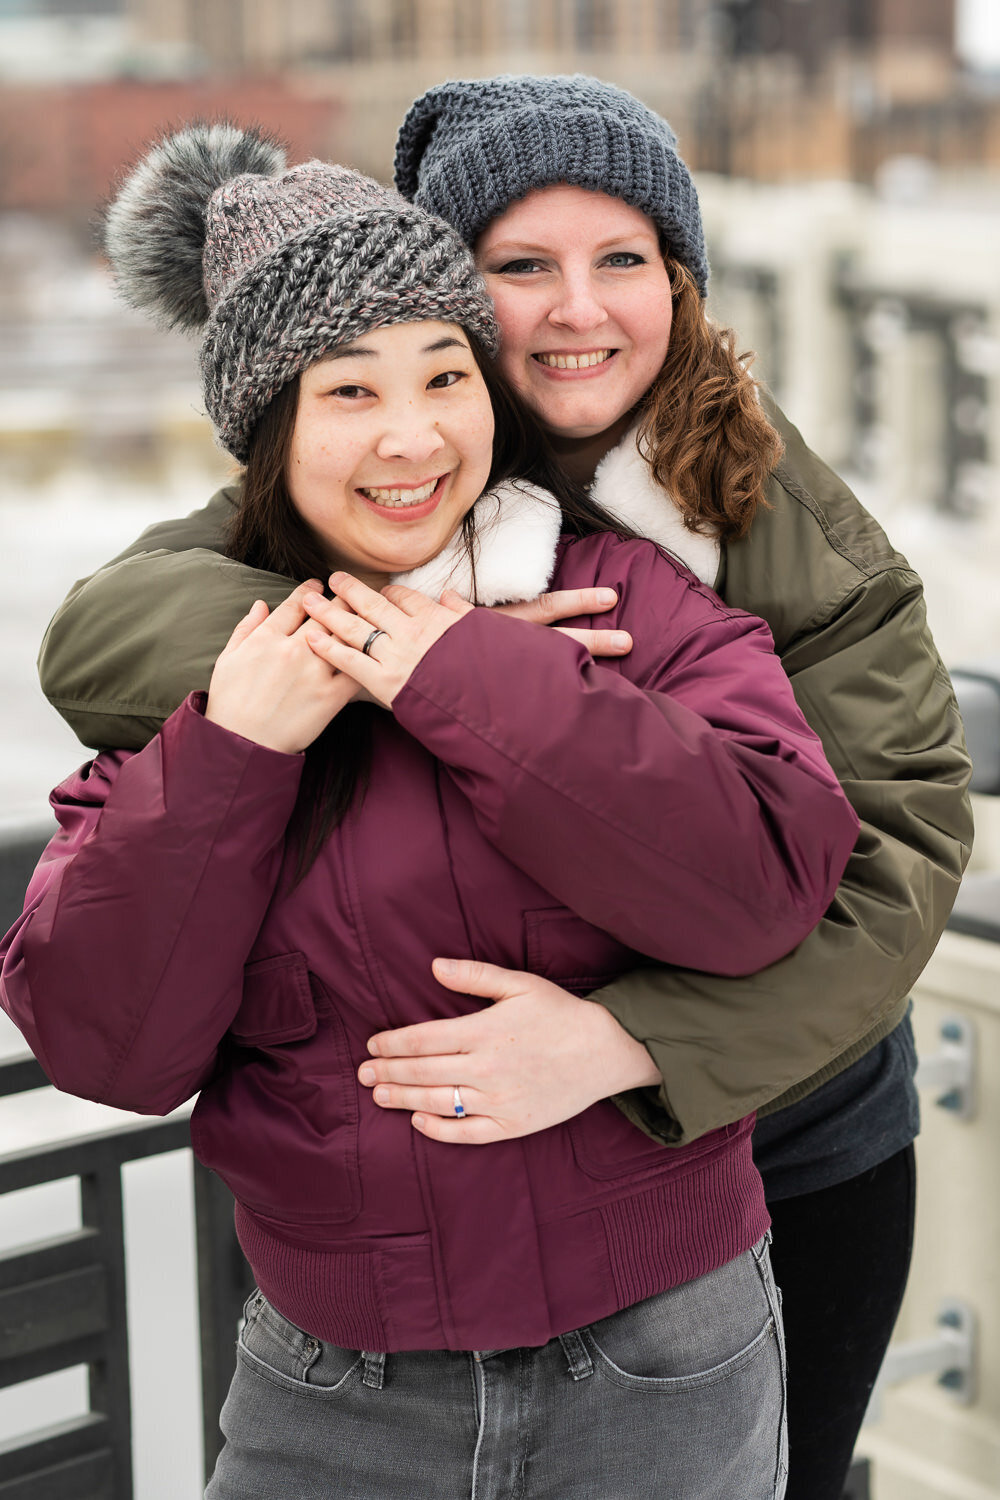 Lesbian couple wearing hats and jackets snuggle.